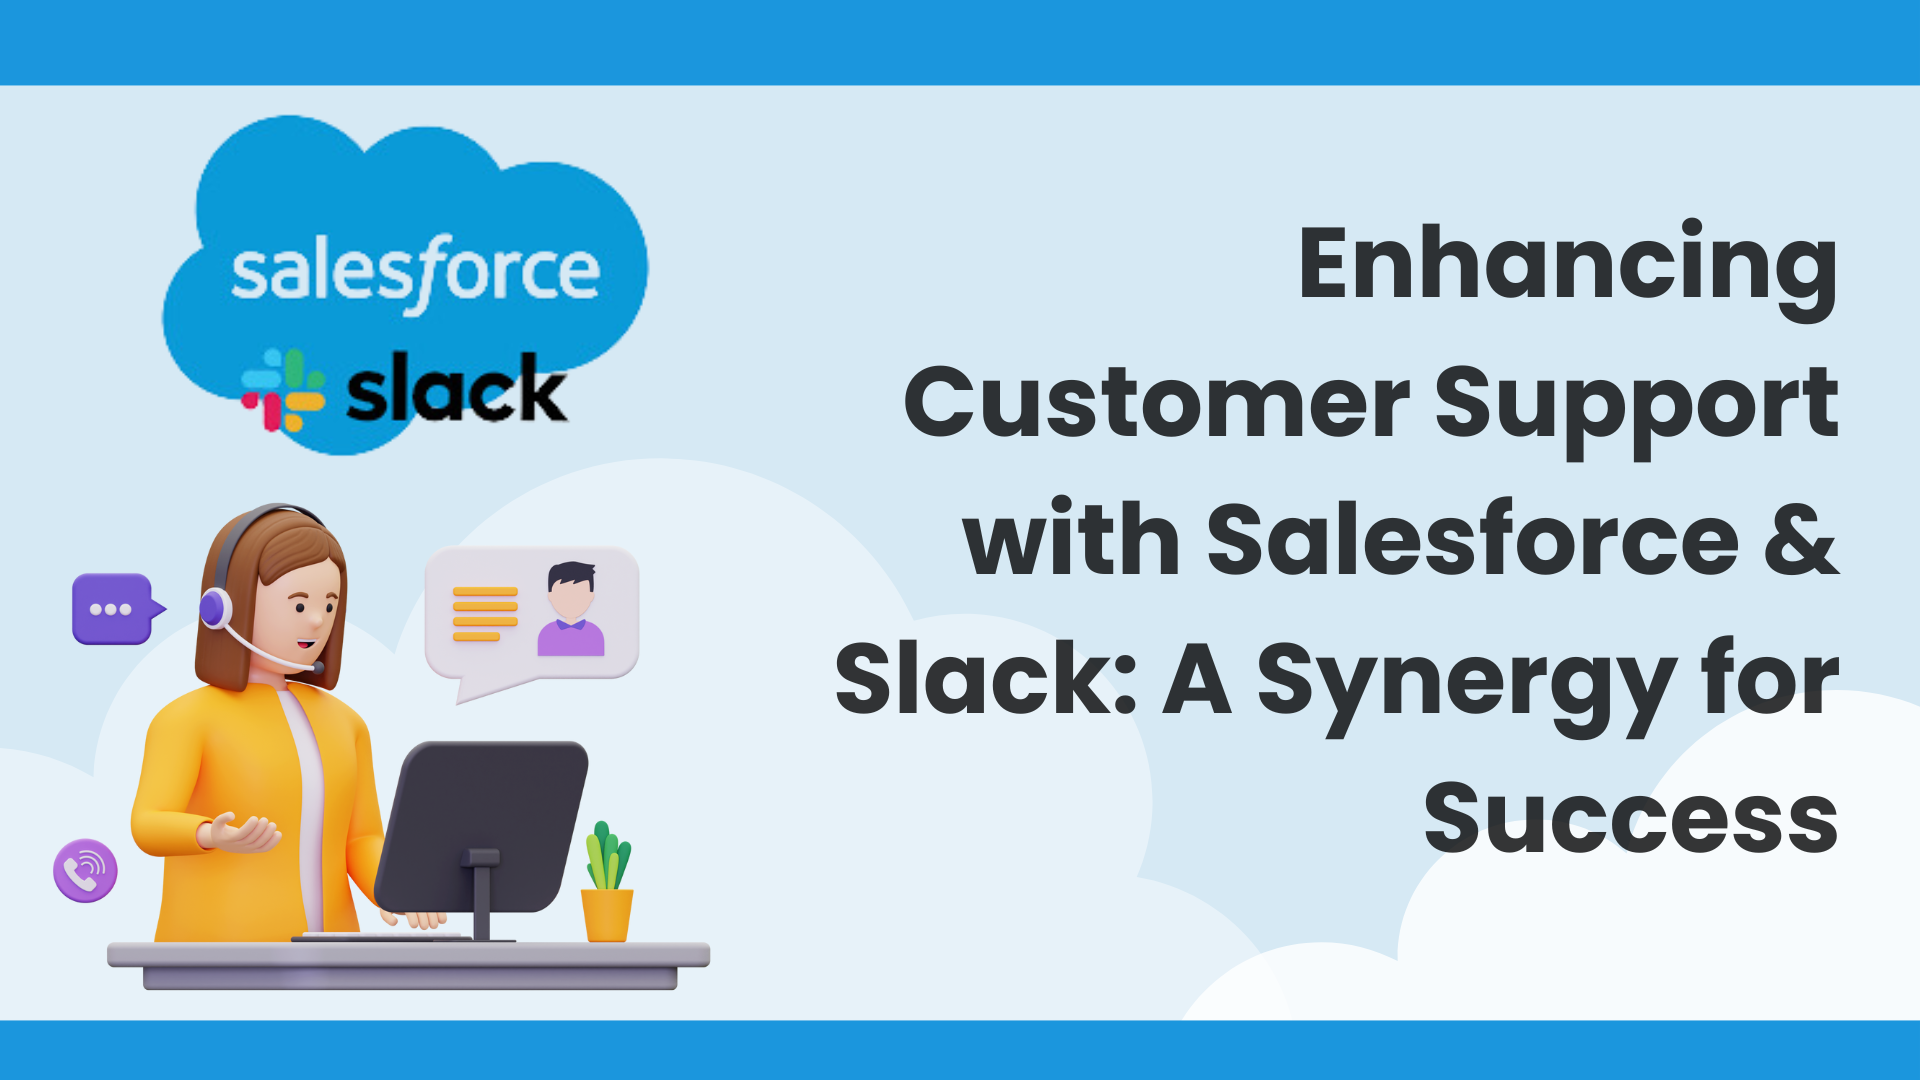 Enhancing Customer Support with Salesforce & Slack: A Synergy for Success